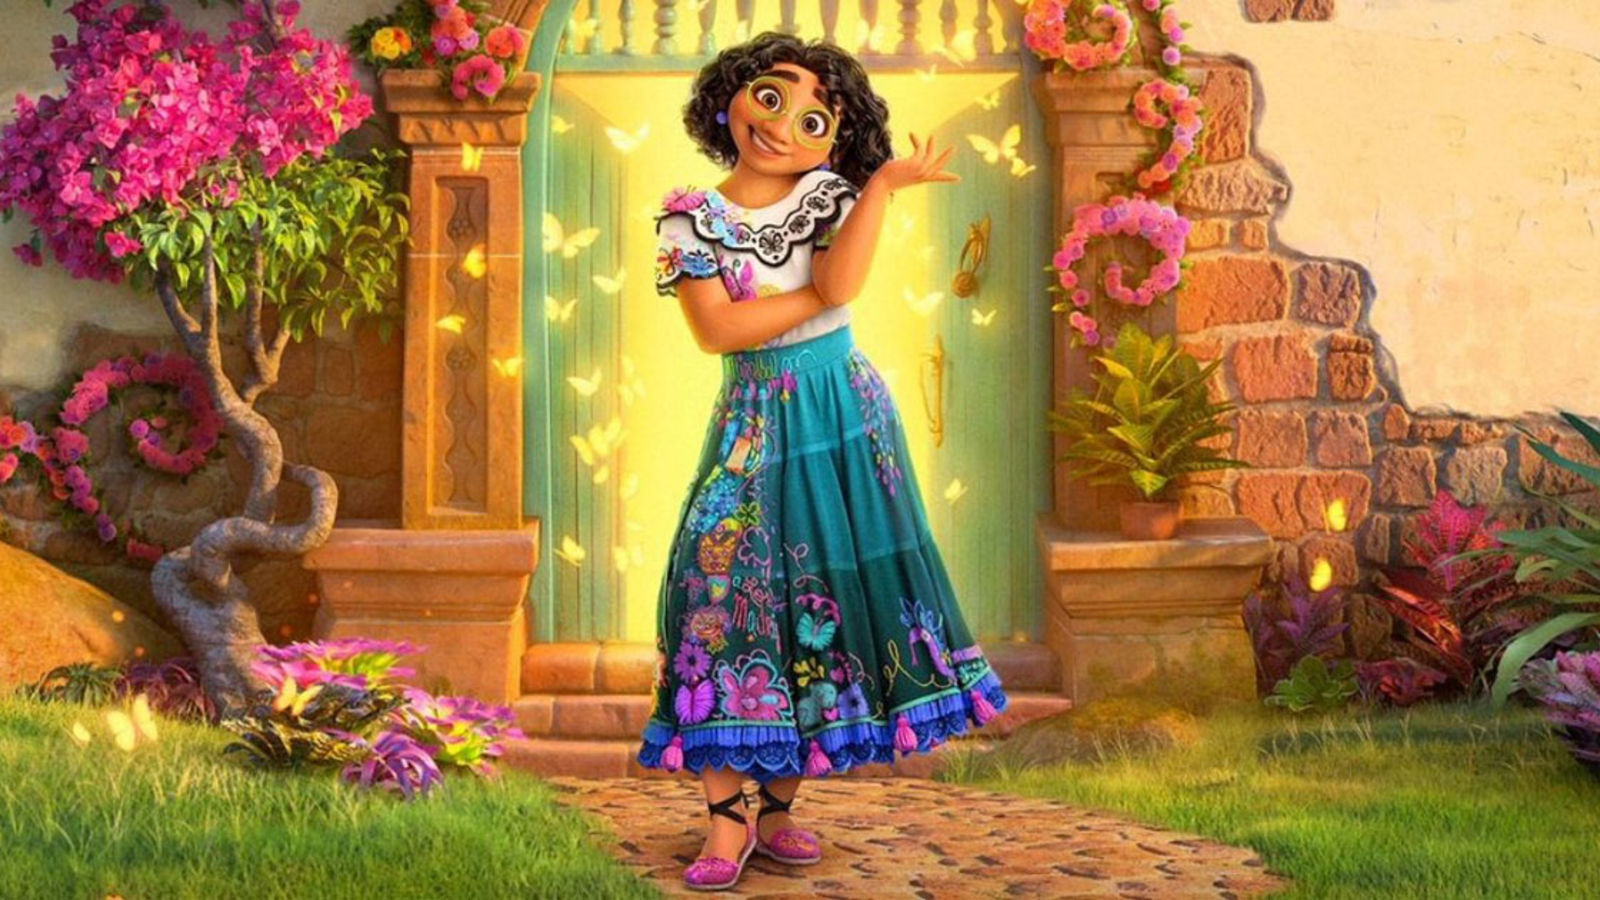 How To Make An Encanto Cosplay From The New Disney Movie